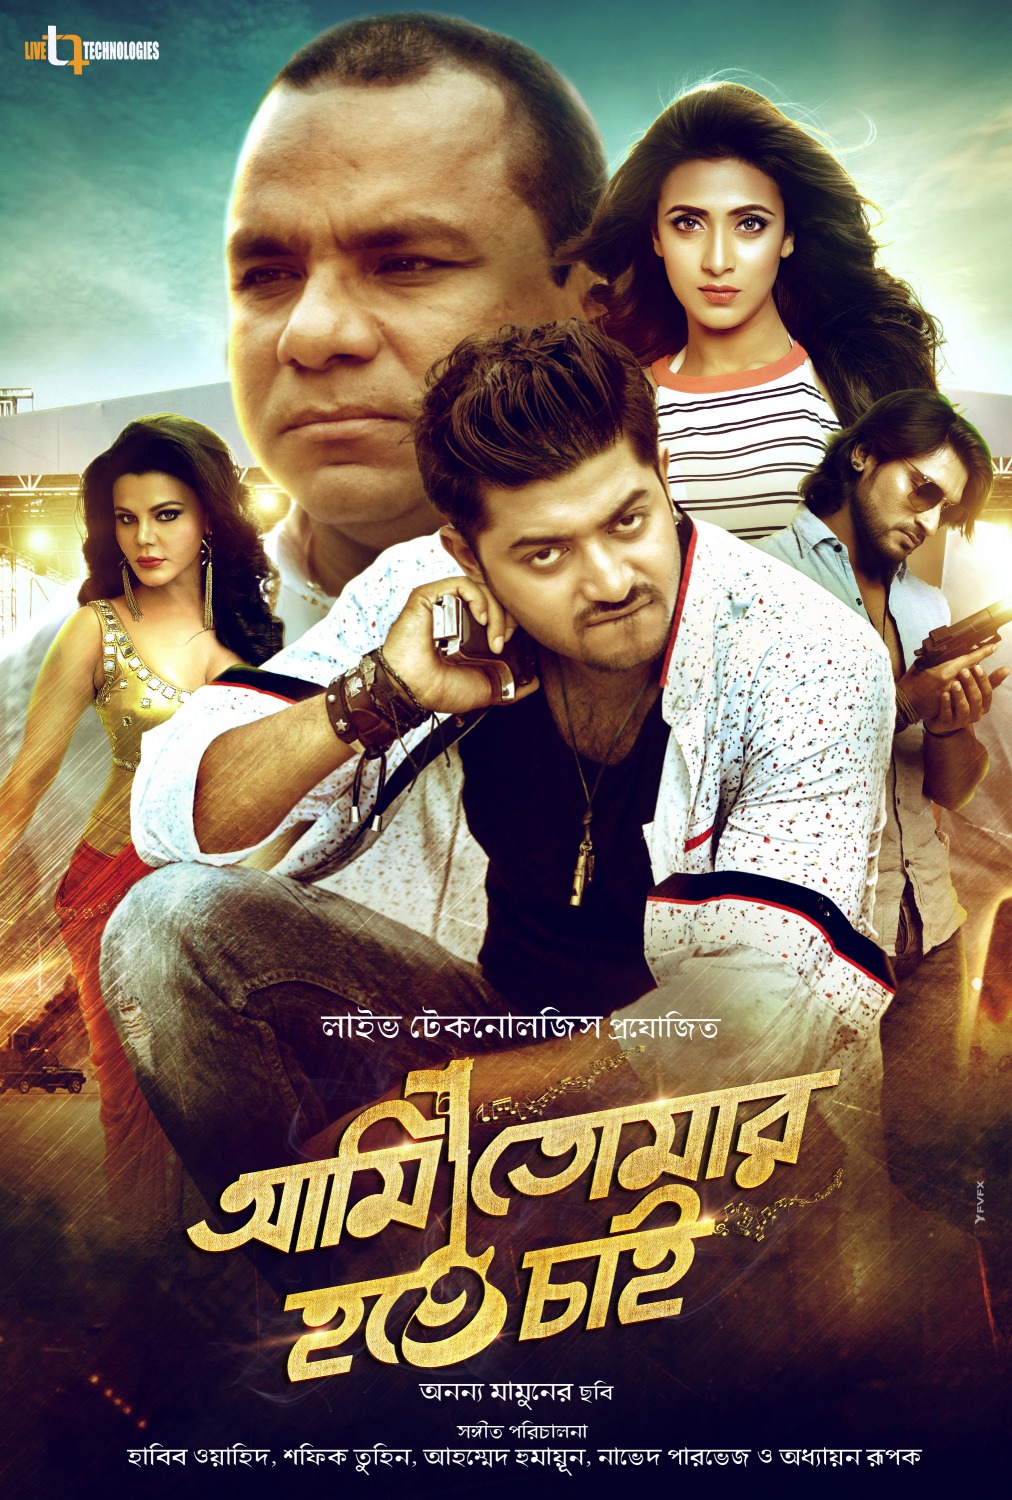 Extra Large Movie Poster Image for Ami Tomar Hote Chai (#6 of 11)